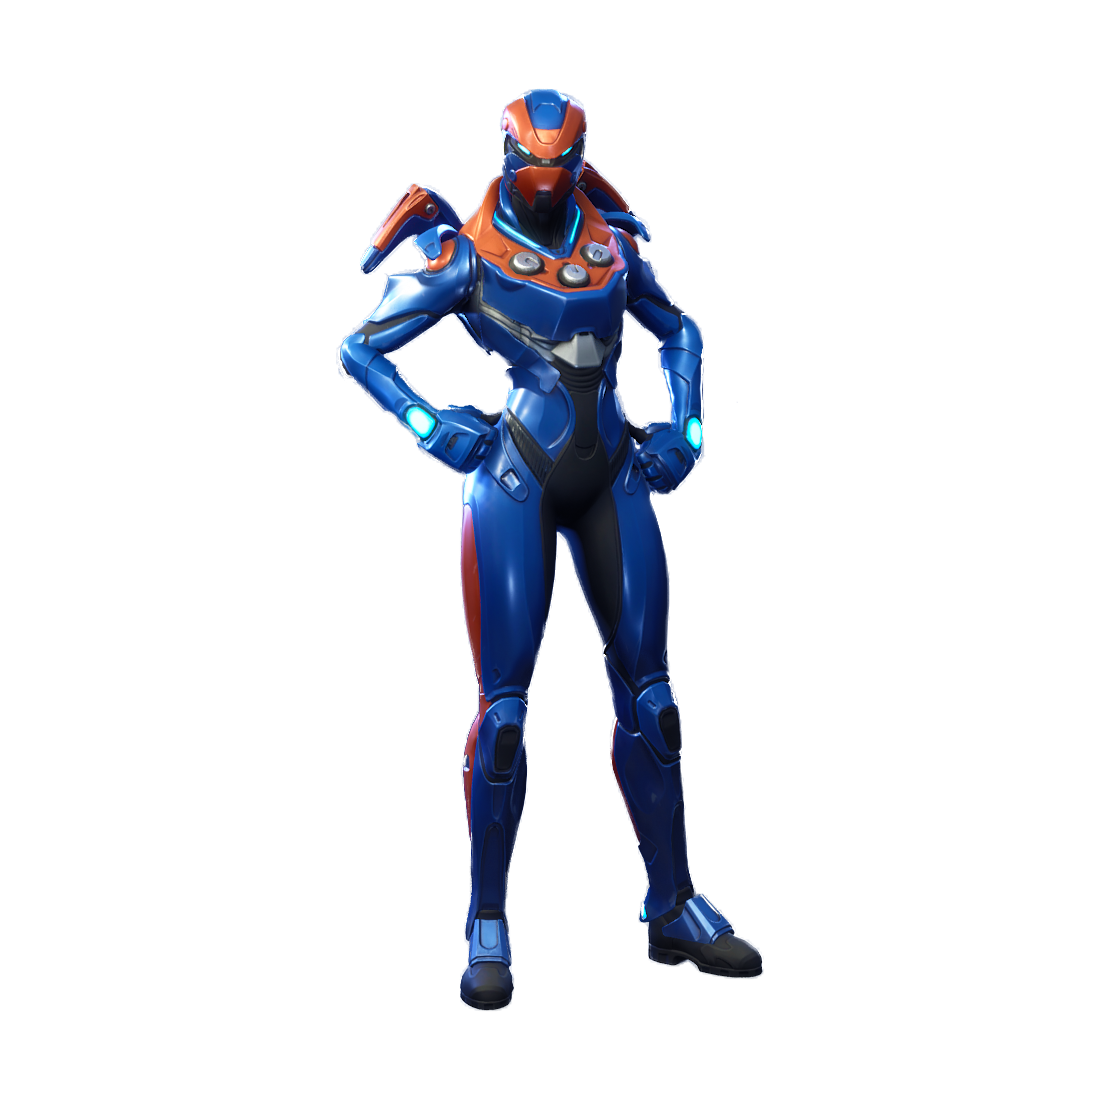 Fortnite Criterion Outfit Png Free Download 47399 Free Icons - fortnite criterion outfit png free download